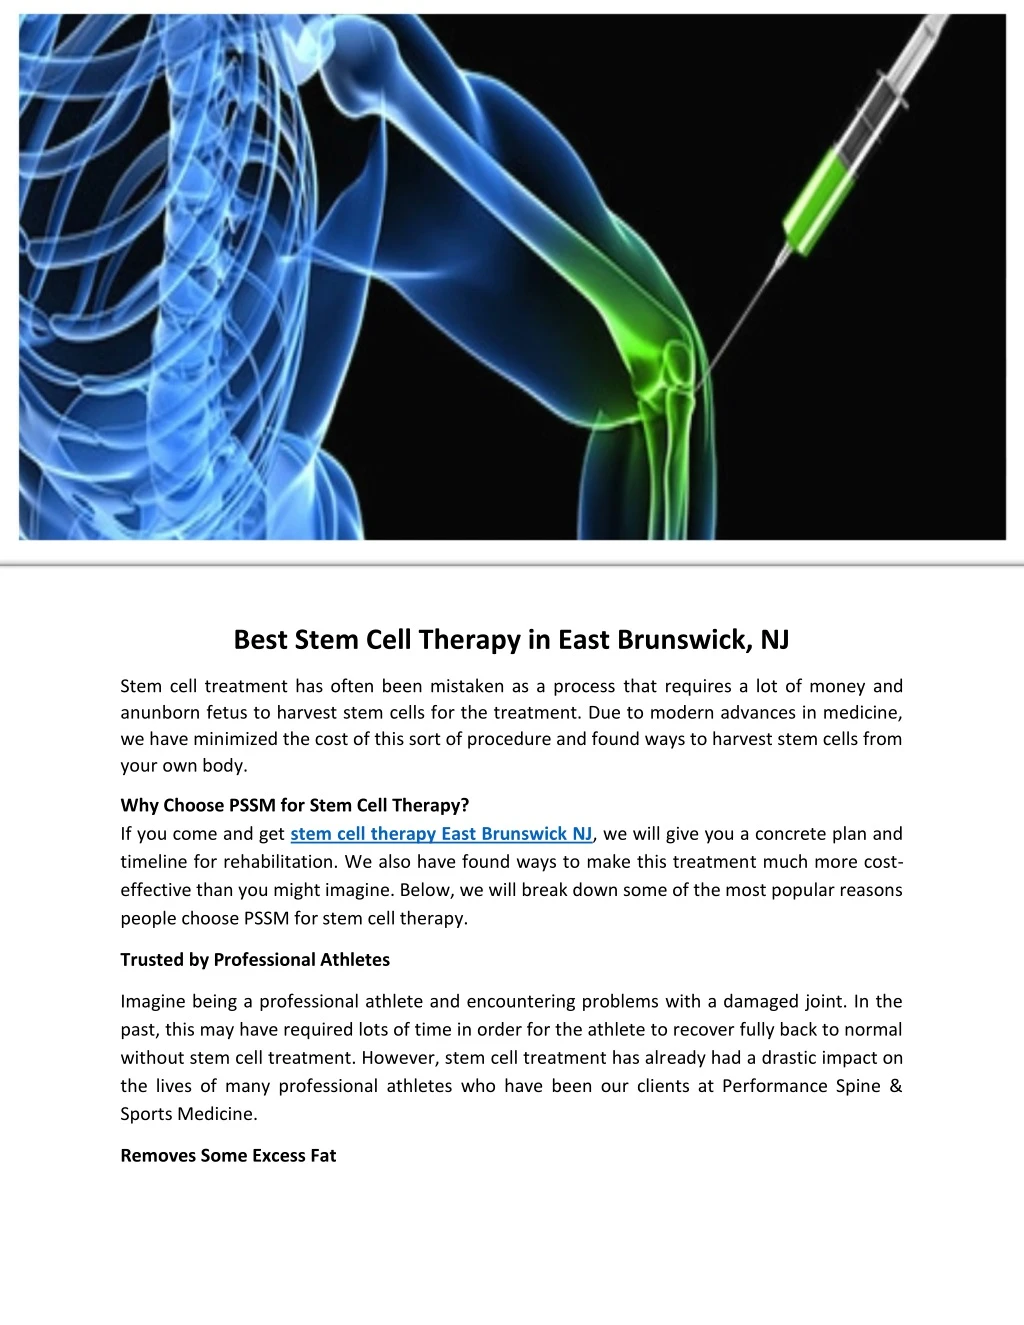 best stem cell therapy in east brunswick nj